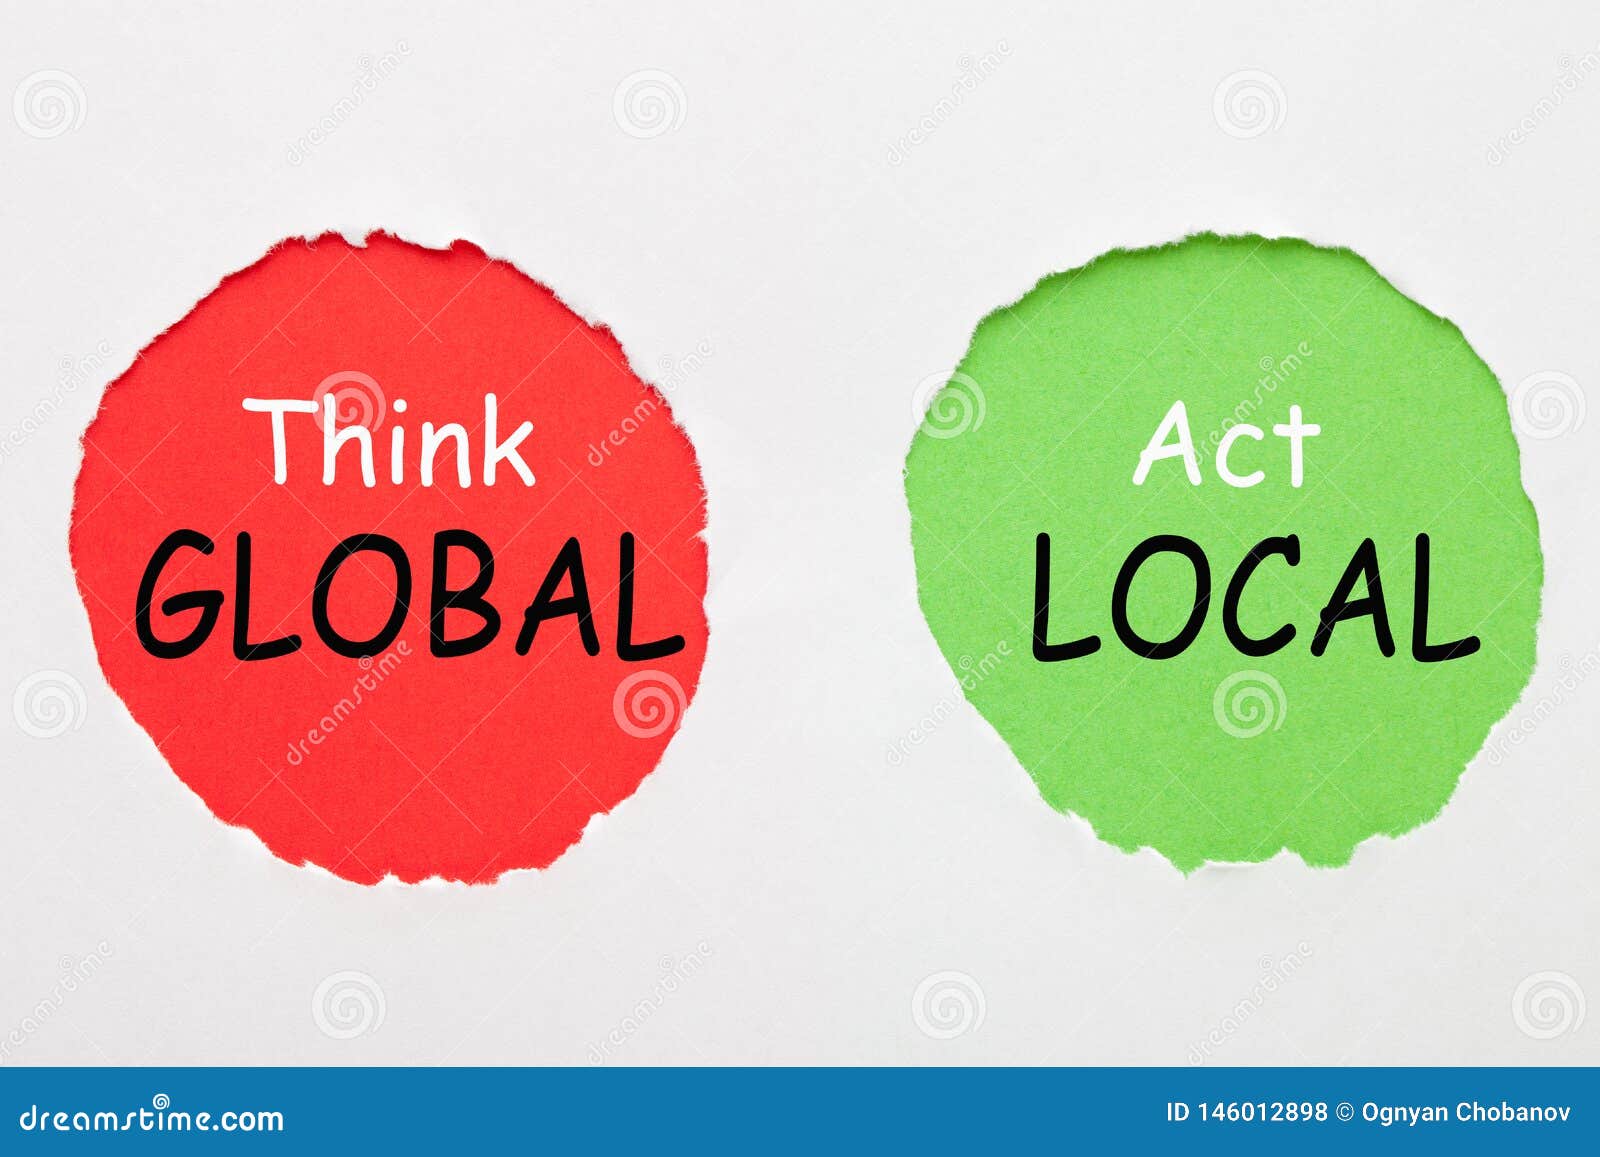 Think Global Act Local Stock Photo Image Of Locally 146012898